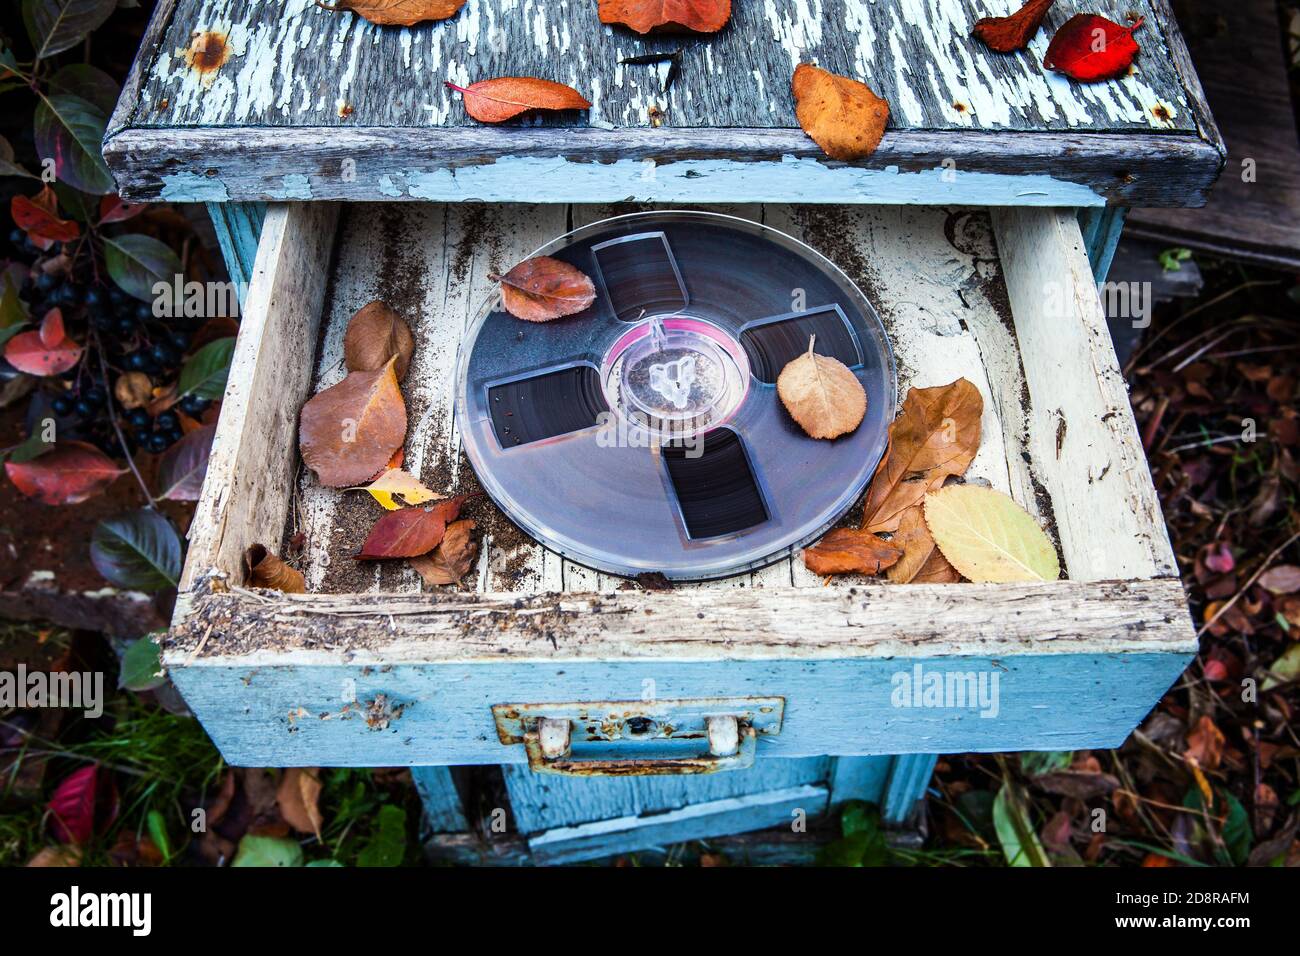 Reel to Reel Tape in the Old Wardrobe and Dirty Furniture Stock Photo